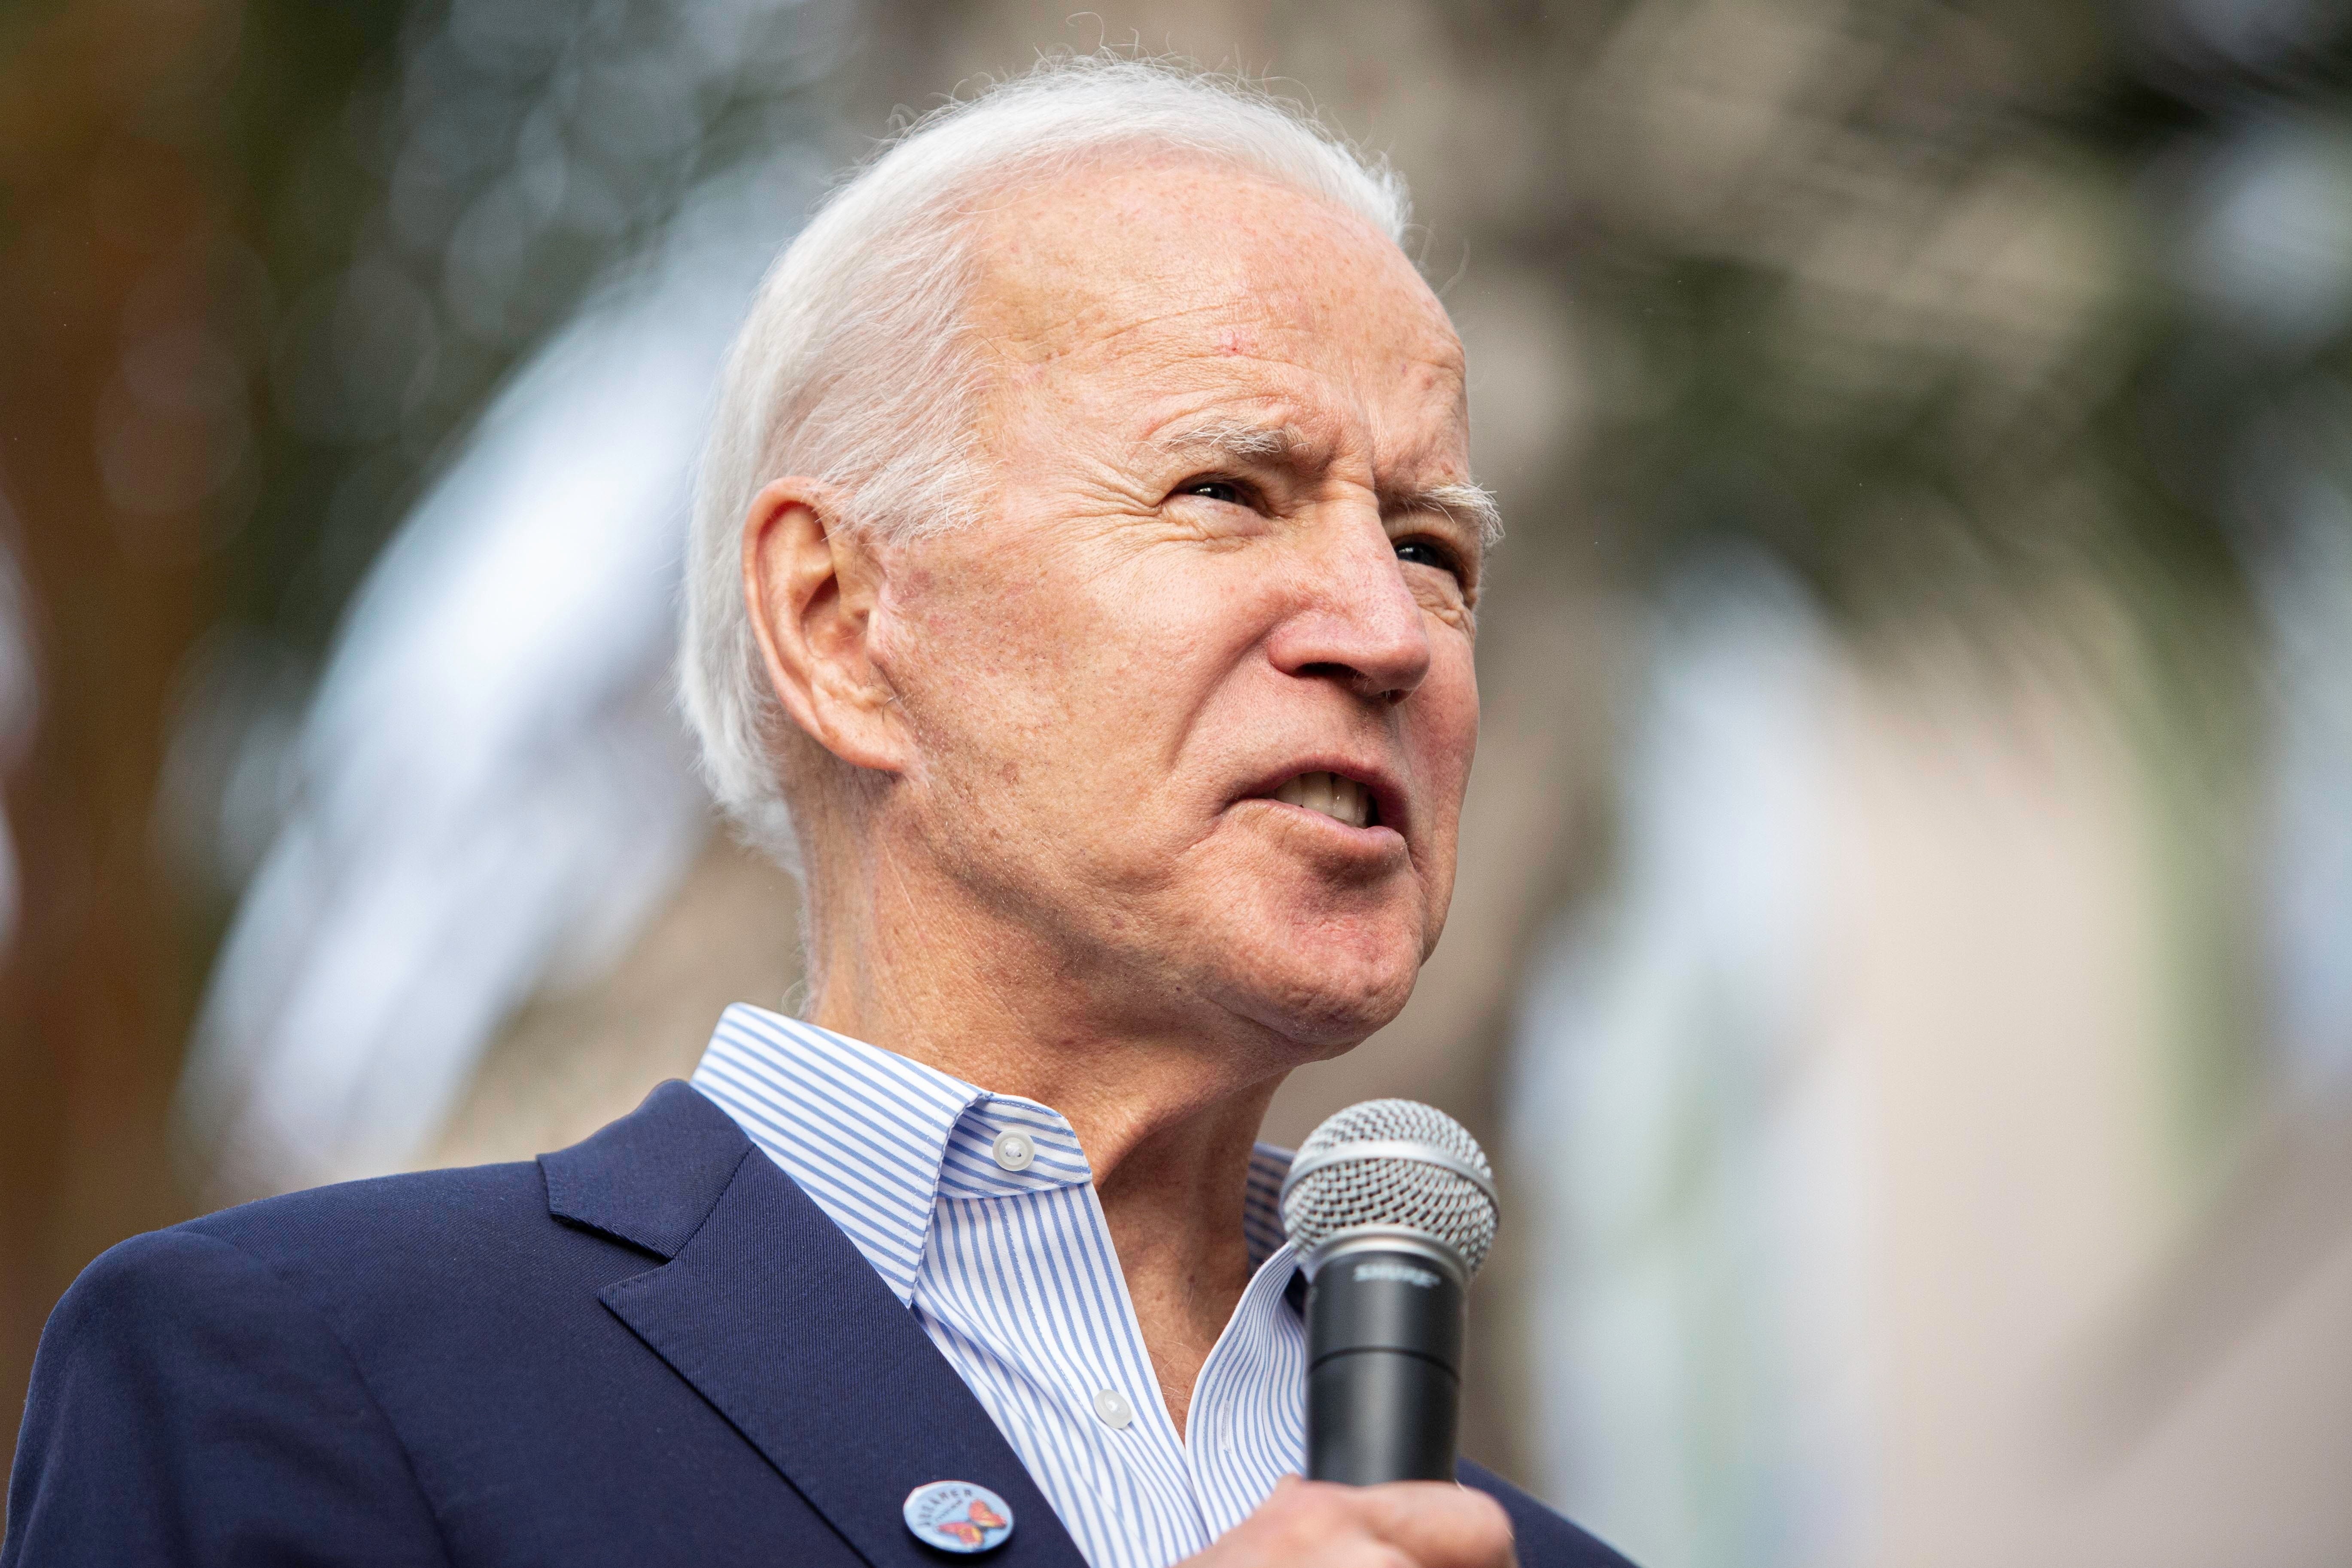 Biden's Approval Rating Threatens To Test Trump's Lows: Here's The Single Issue That's Weighing On People's Minds